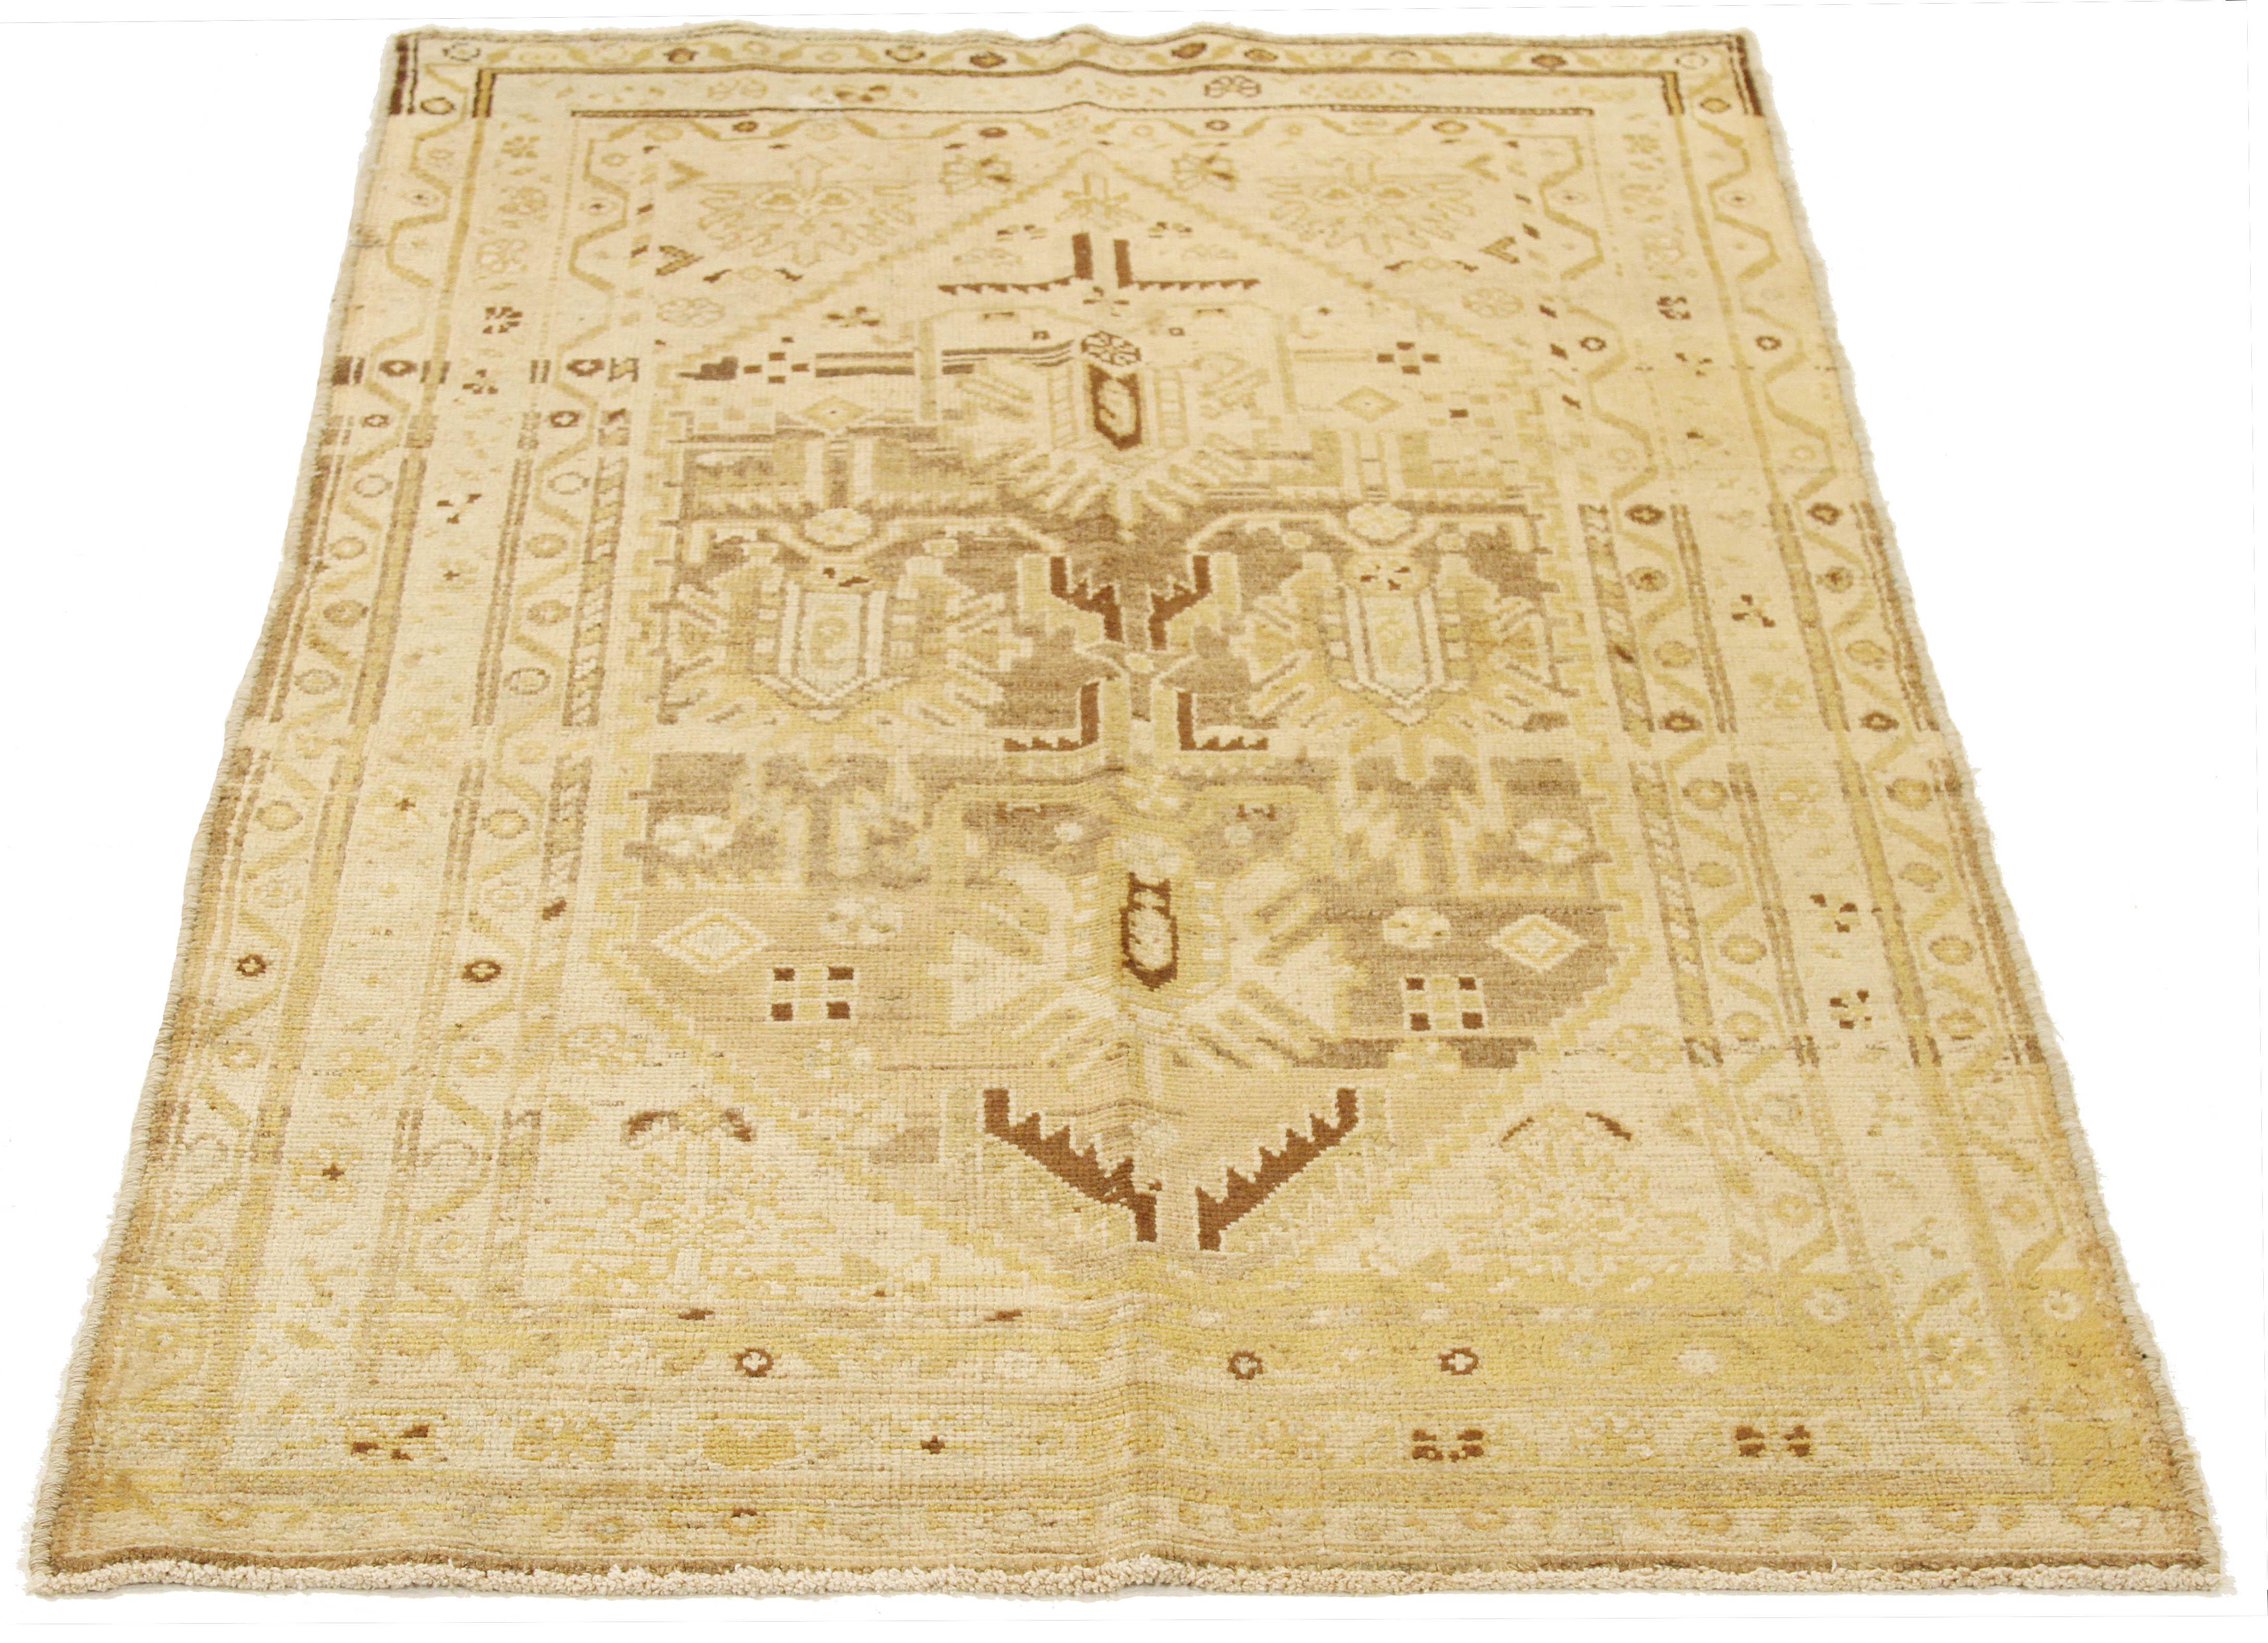 Antique Persian rug handwoven from the finest sheep’s wool and colored with all-natural vegetable dyes that are safe for humans and pets. It’s a traditional Malayer design featuring brown and beige tribal details over an ivory field. It’s a lovely